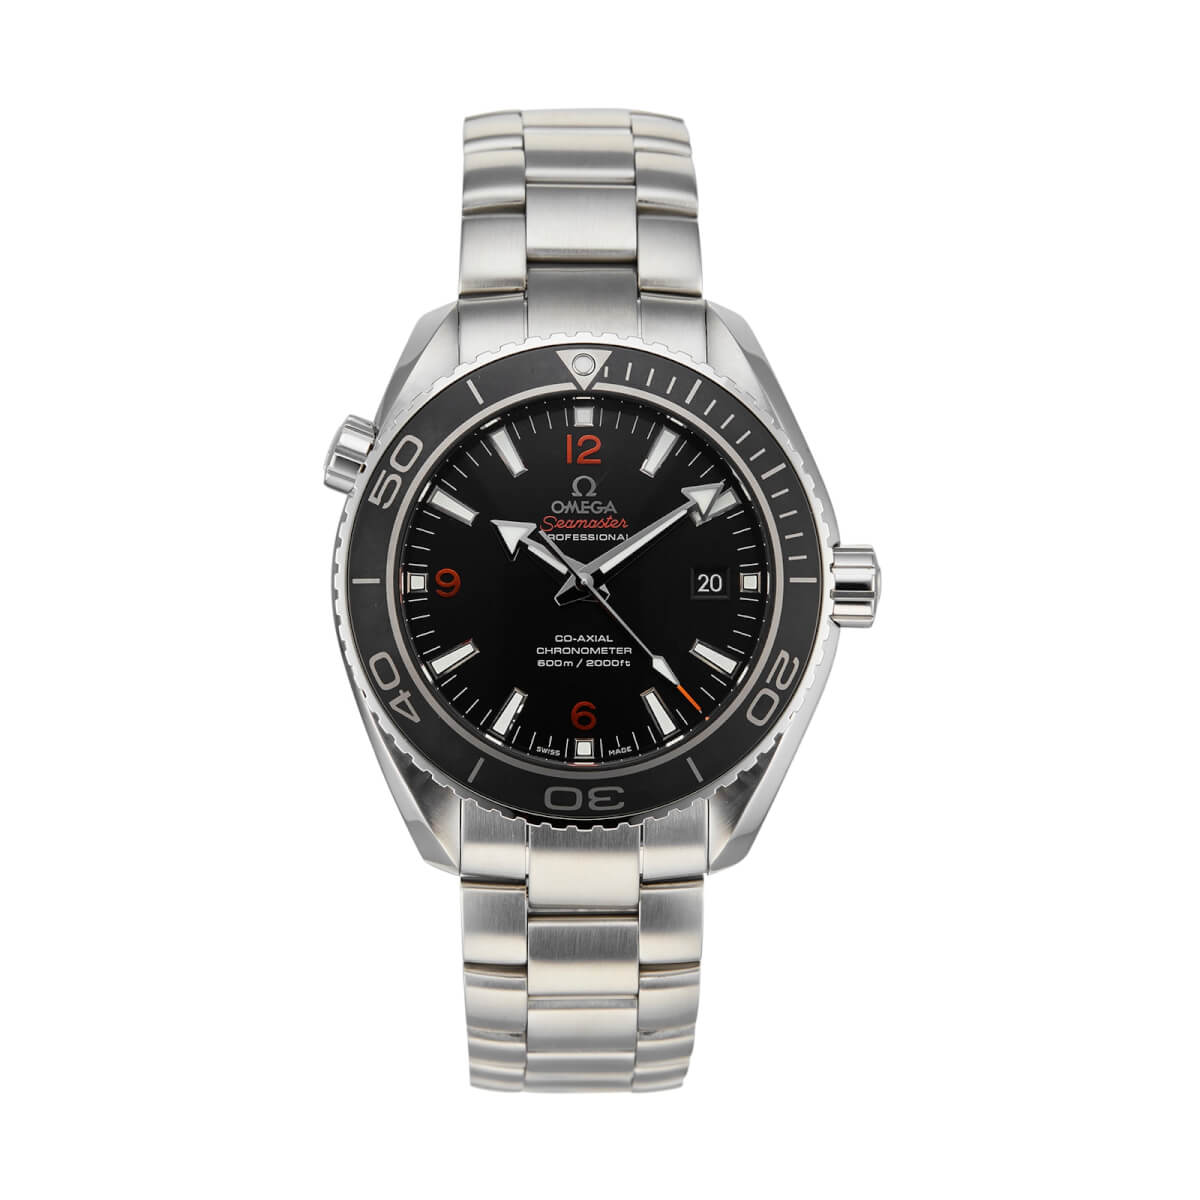 Pre-Owned OMEGA Seamaster Planet Ocean 600M Mens Watch 232.30.46.21.01.003